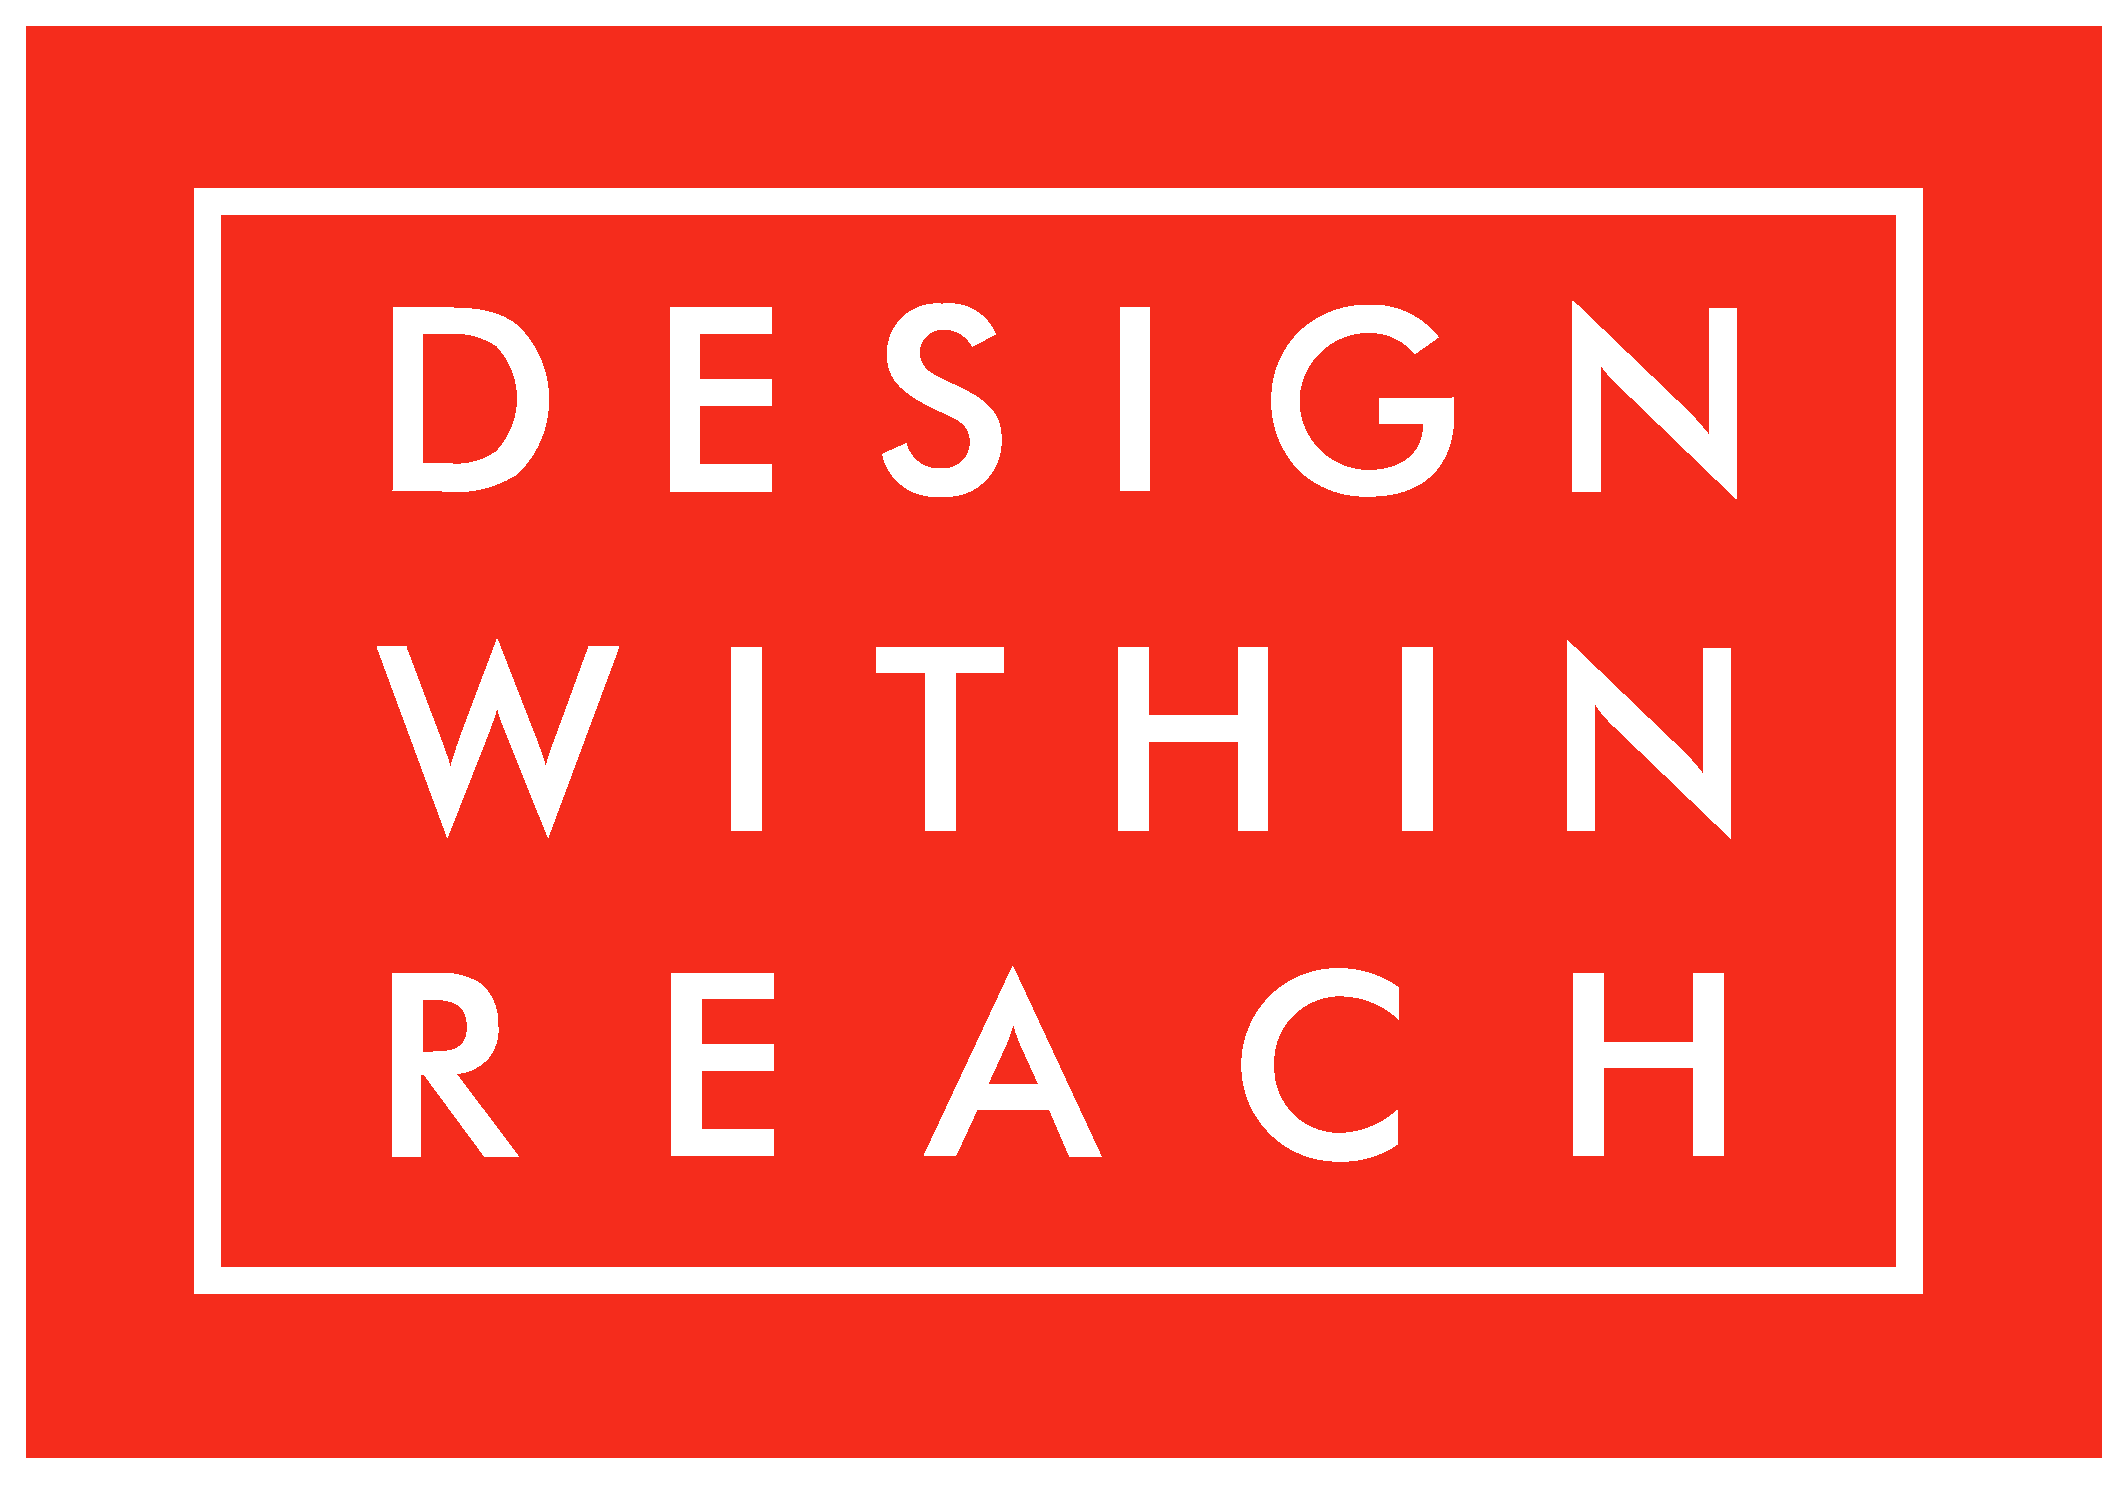 Design Within Reach Logo (DWR) png